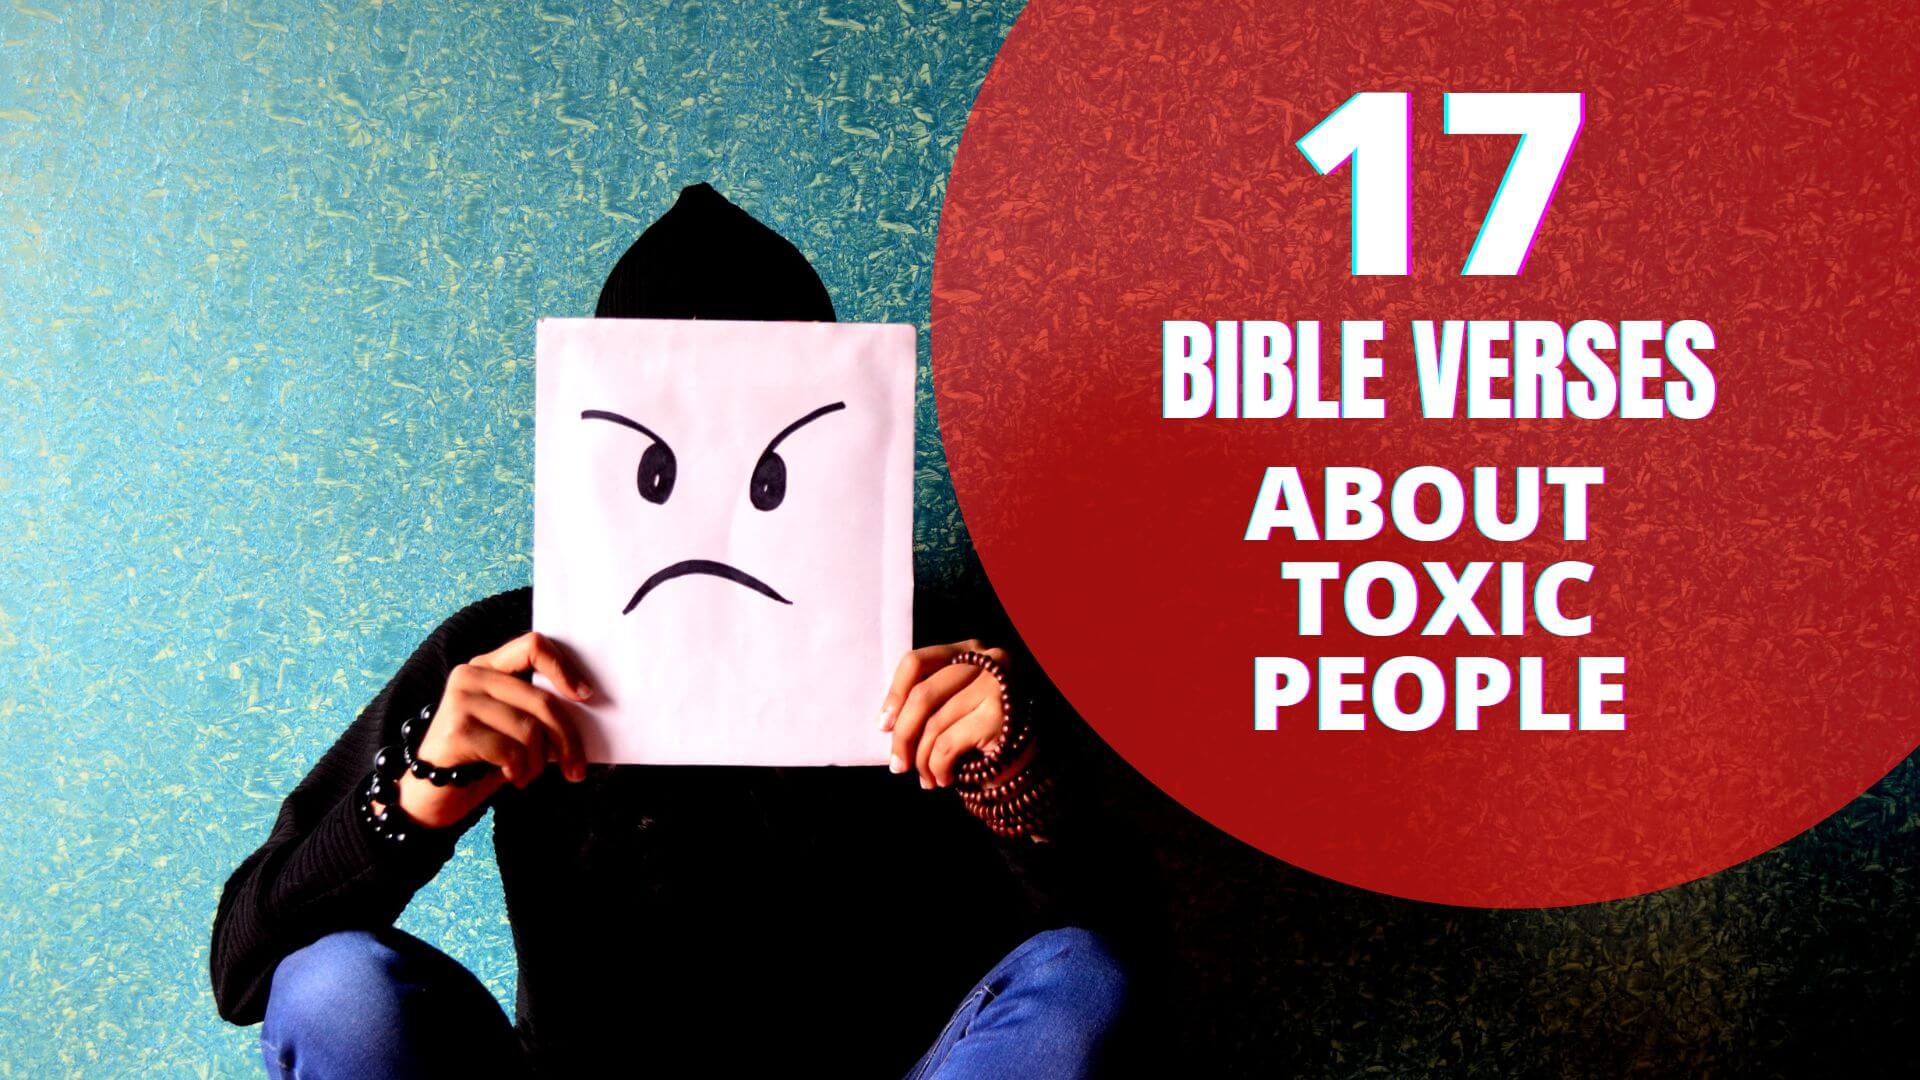 Bible verses about toxic people